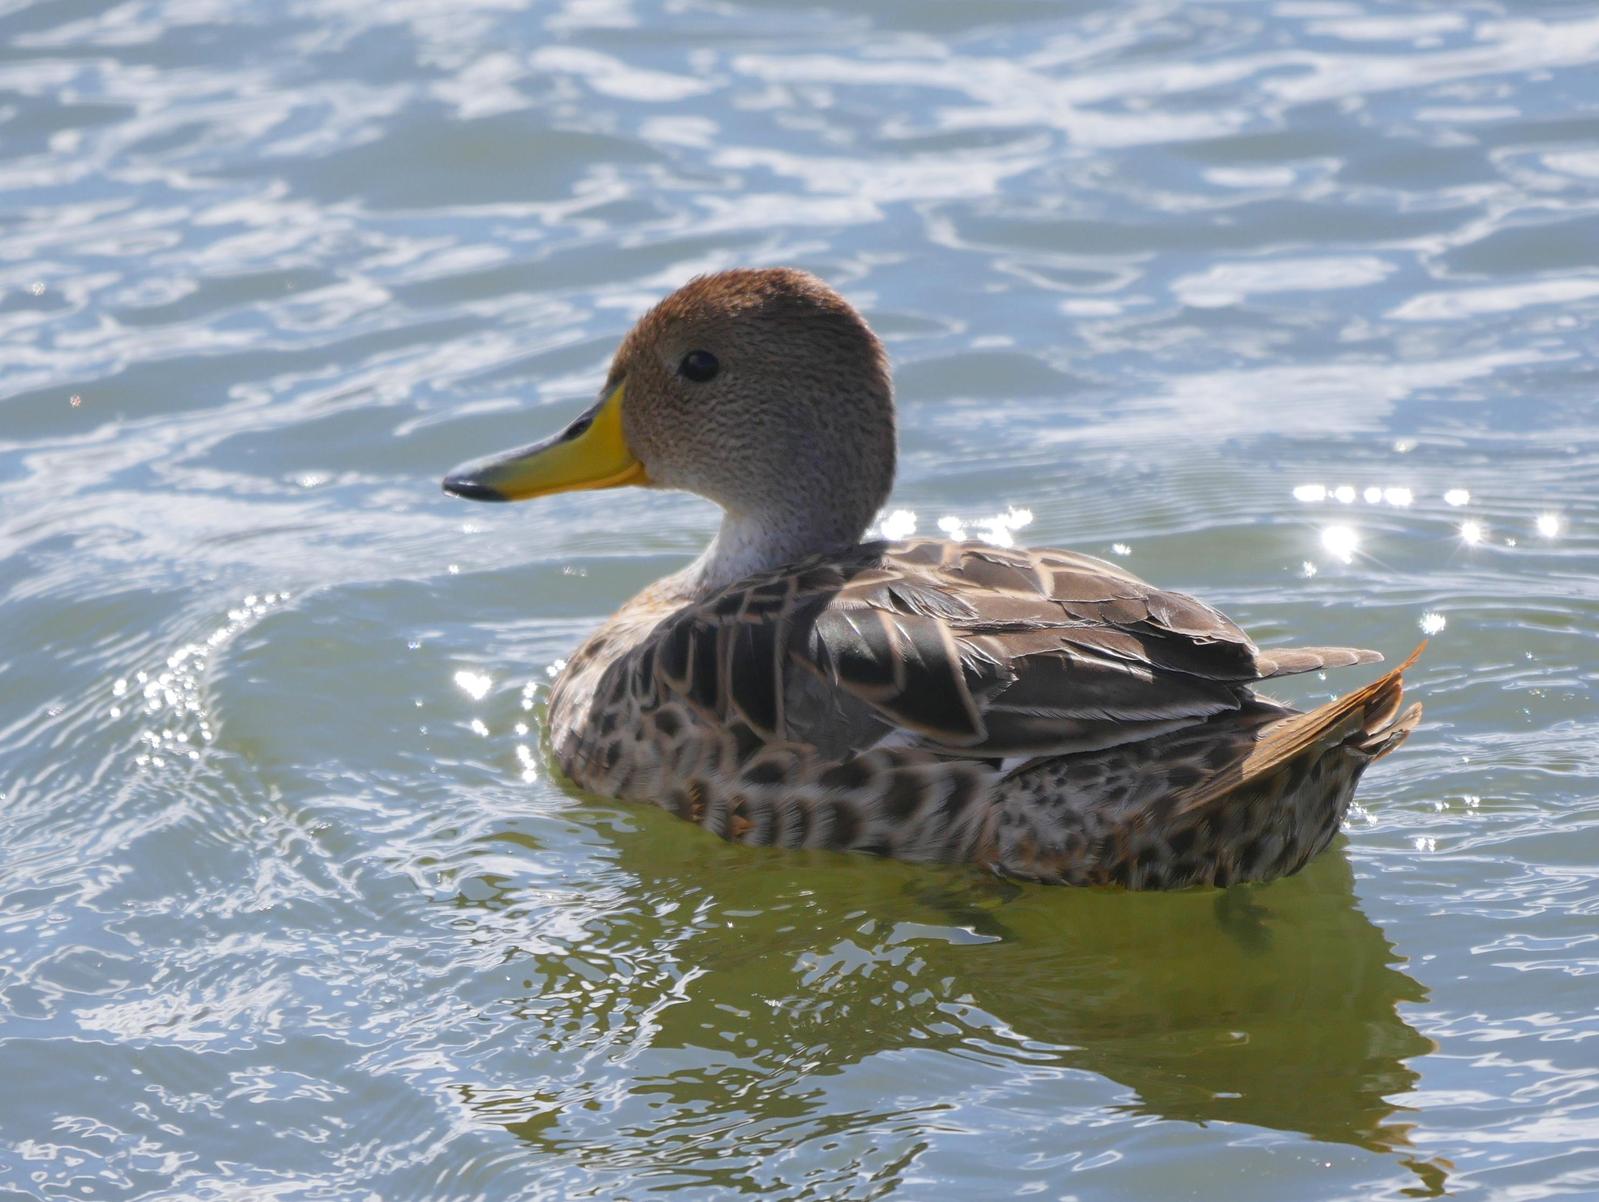 Yellow-billed Pintail Photo by Peter Lowe